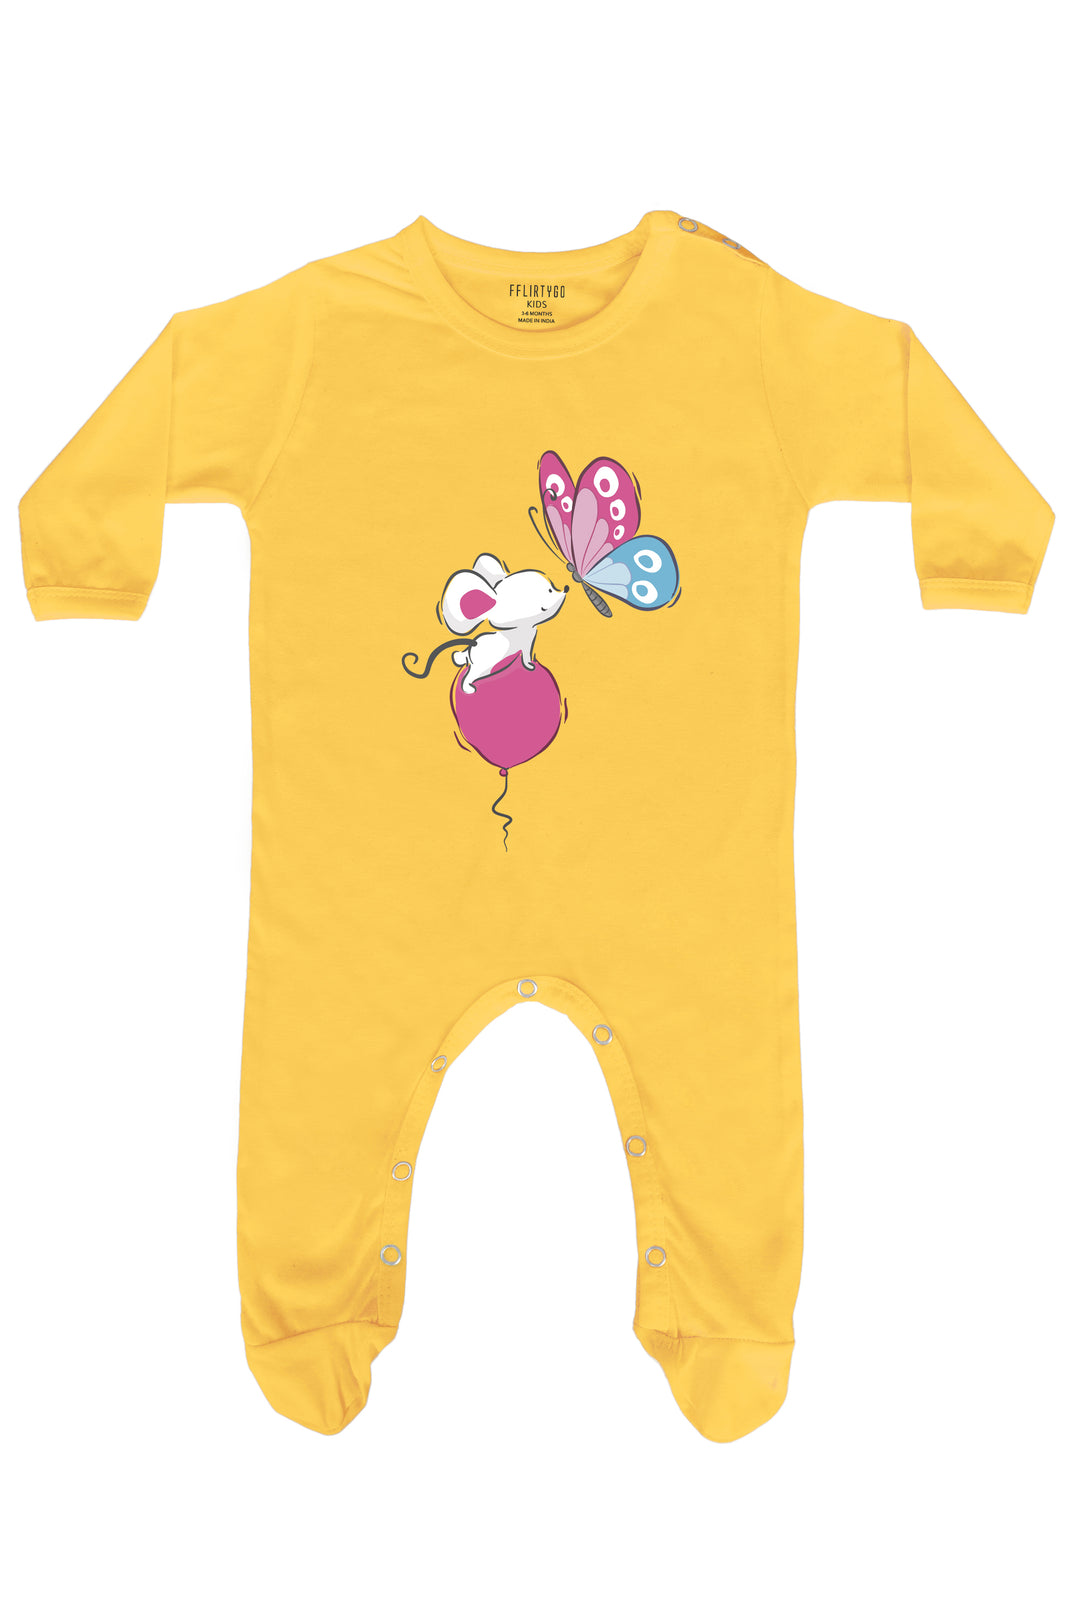 Rat On Balloon and Butterfly Baby Romper | Onesies